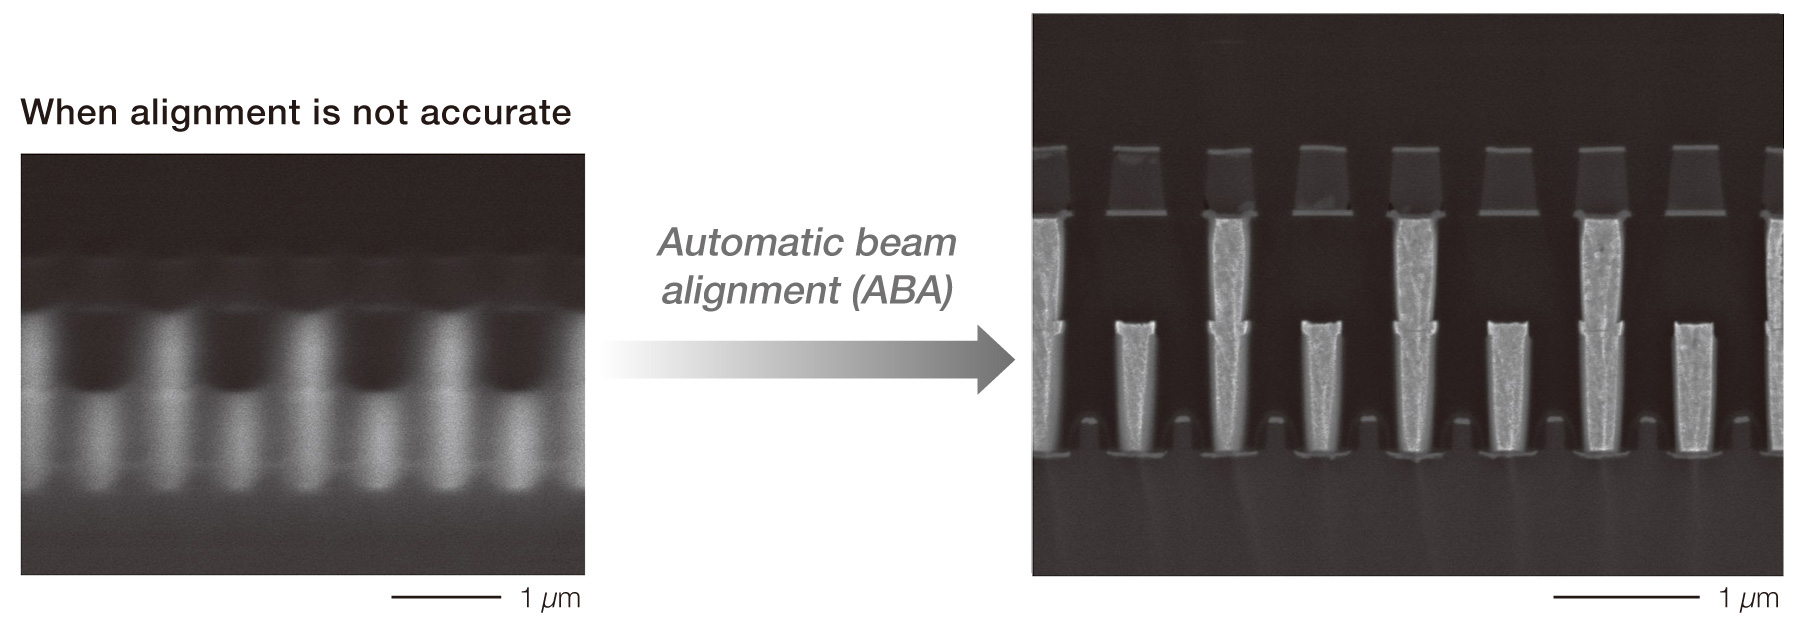 When alignment is not accurate: Automatic beam alignment (ABA)